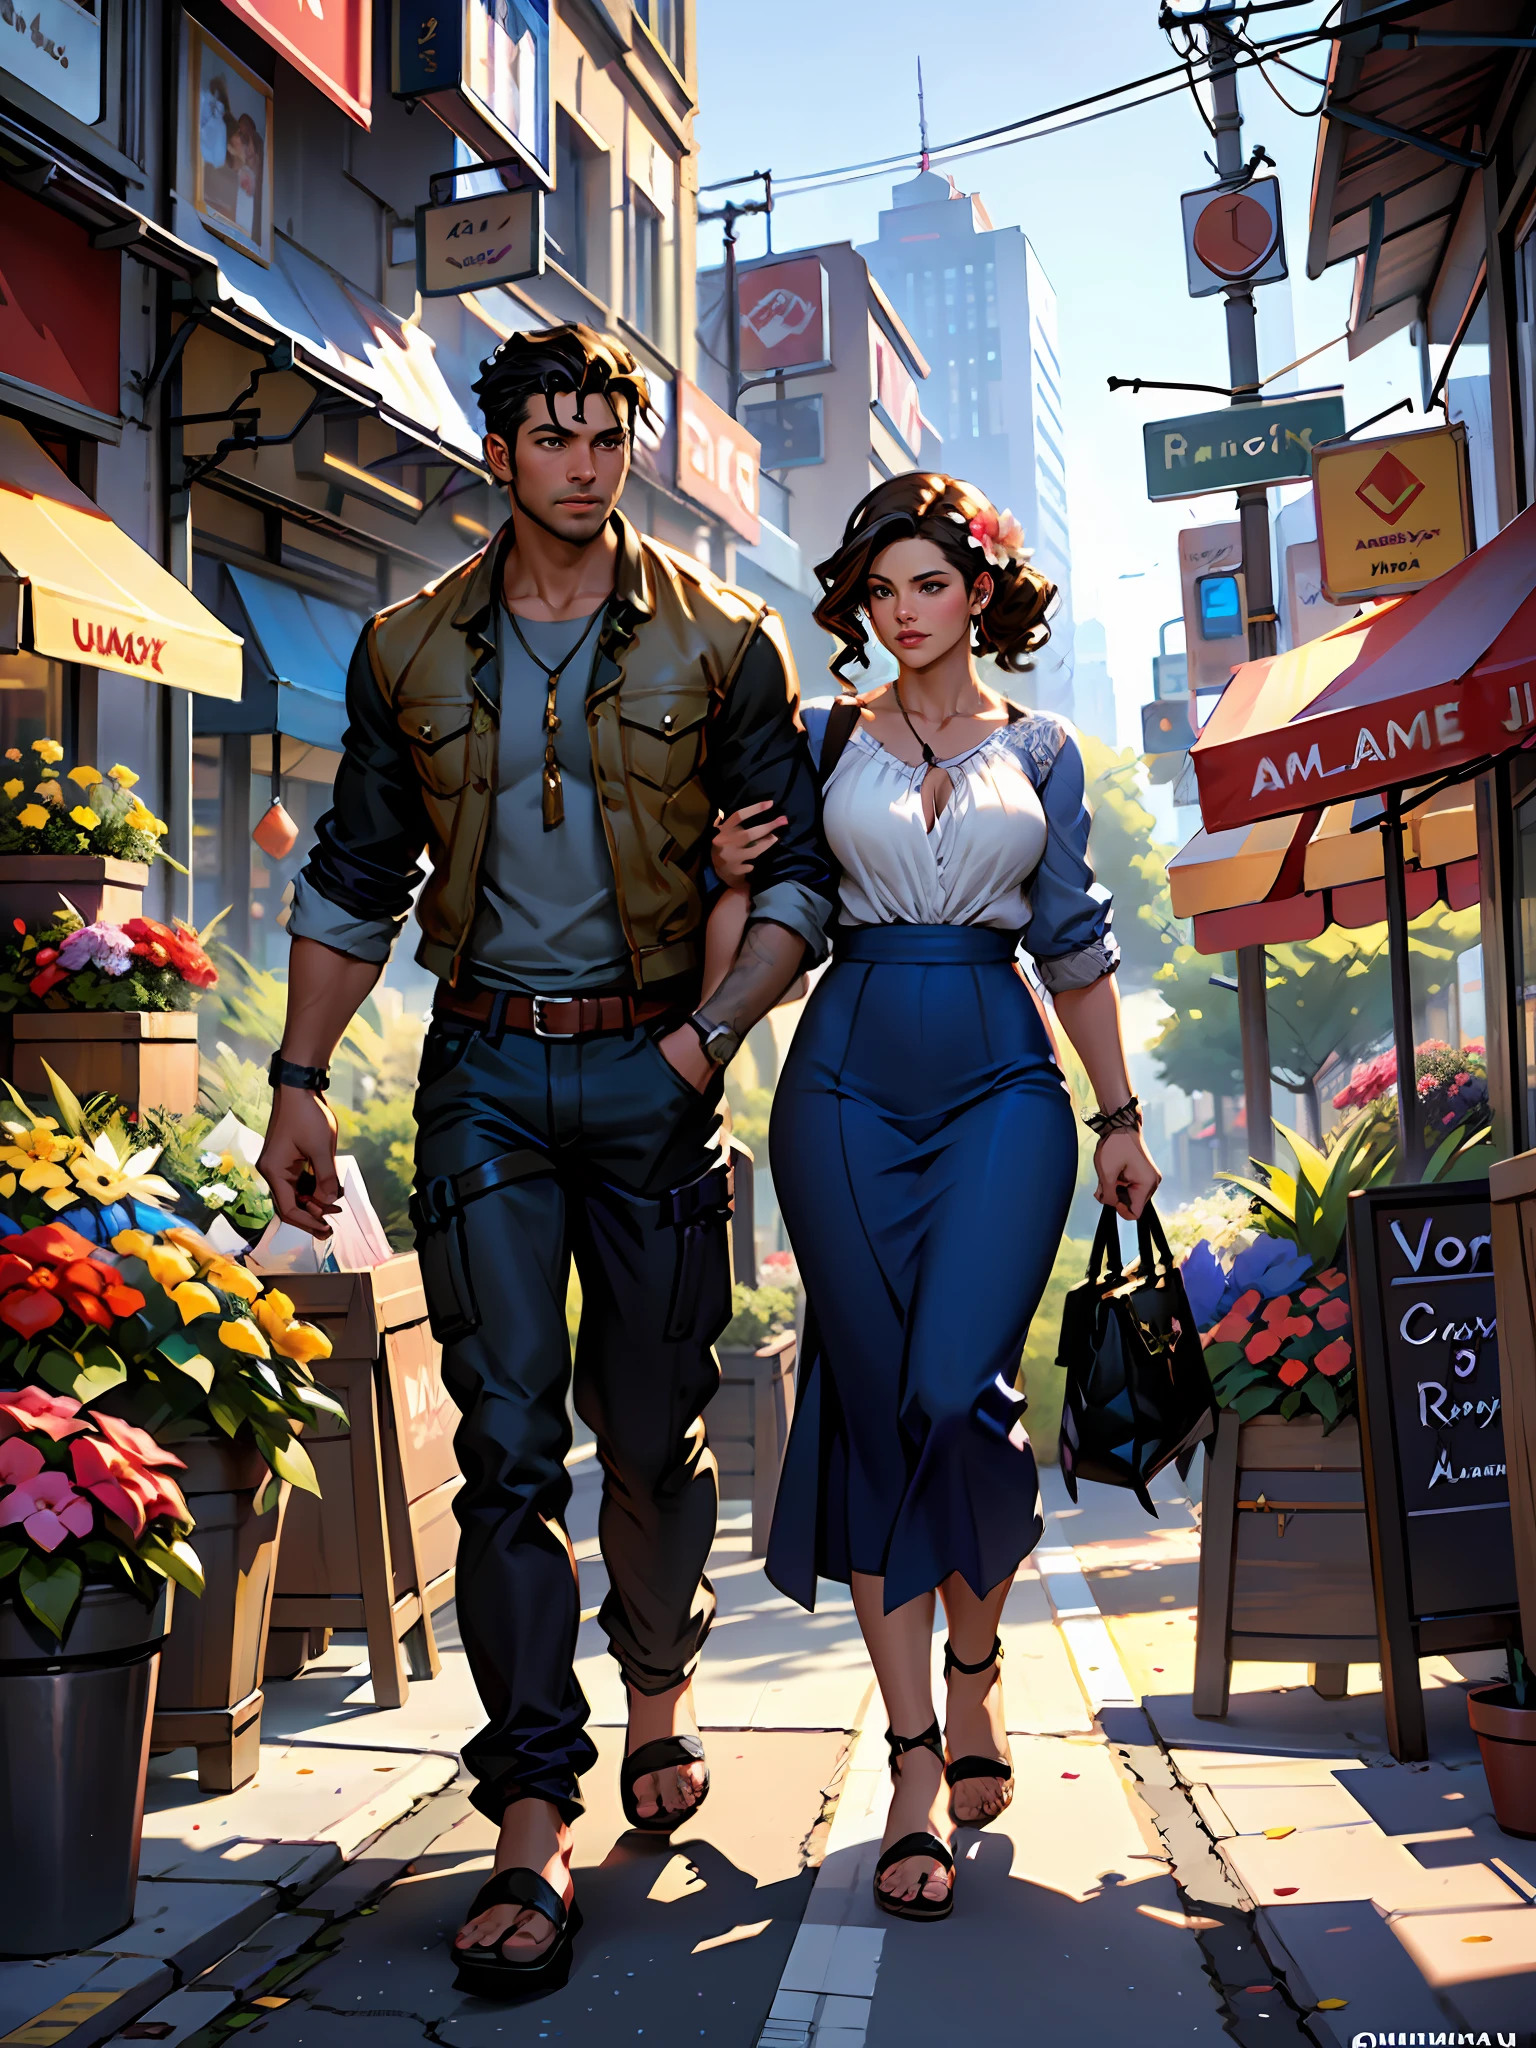 there is a man and woman standing in front of a store, flower shop scene, romance novel cover, detailed scene, stylized urban fantasy artwork, in city street, beautiful screenshot, life simulator game screenshot, hyper detailed scene, realistic fantasy render, realistic scene, highly detailed scene, inspired by Jaime Frias, photorealistic